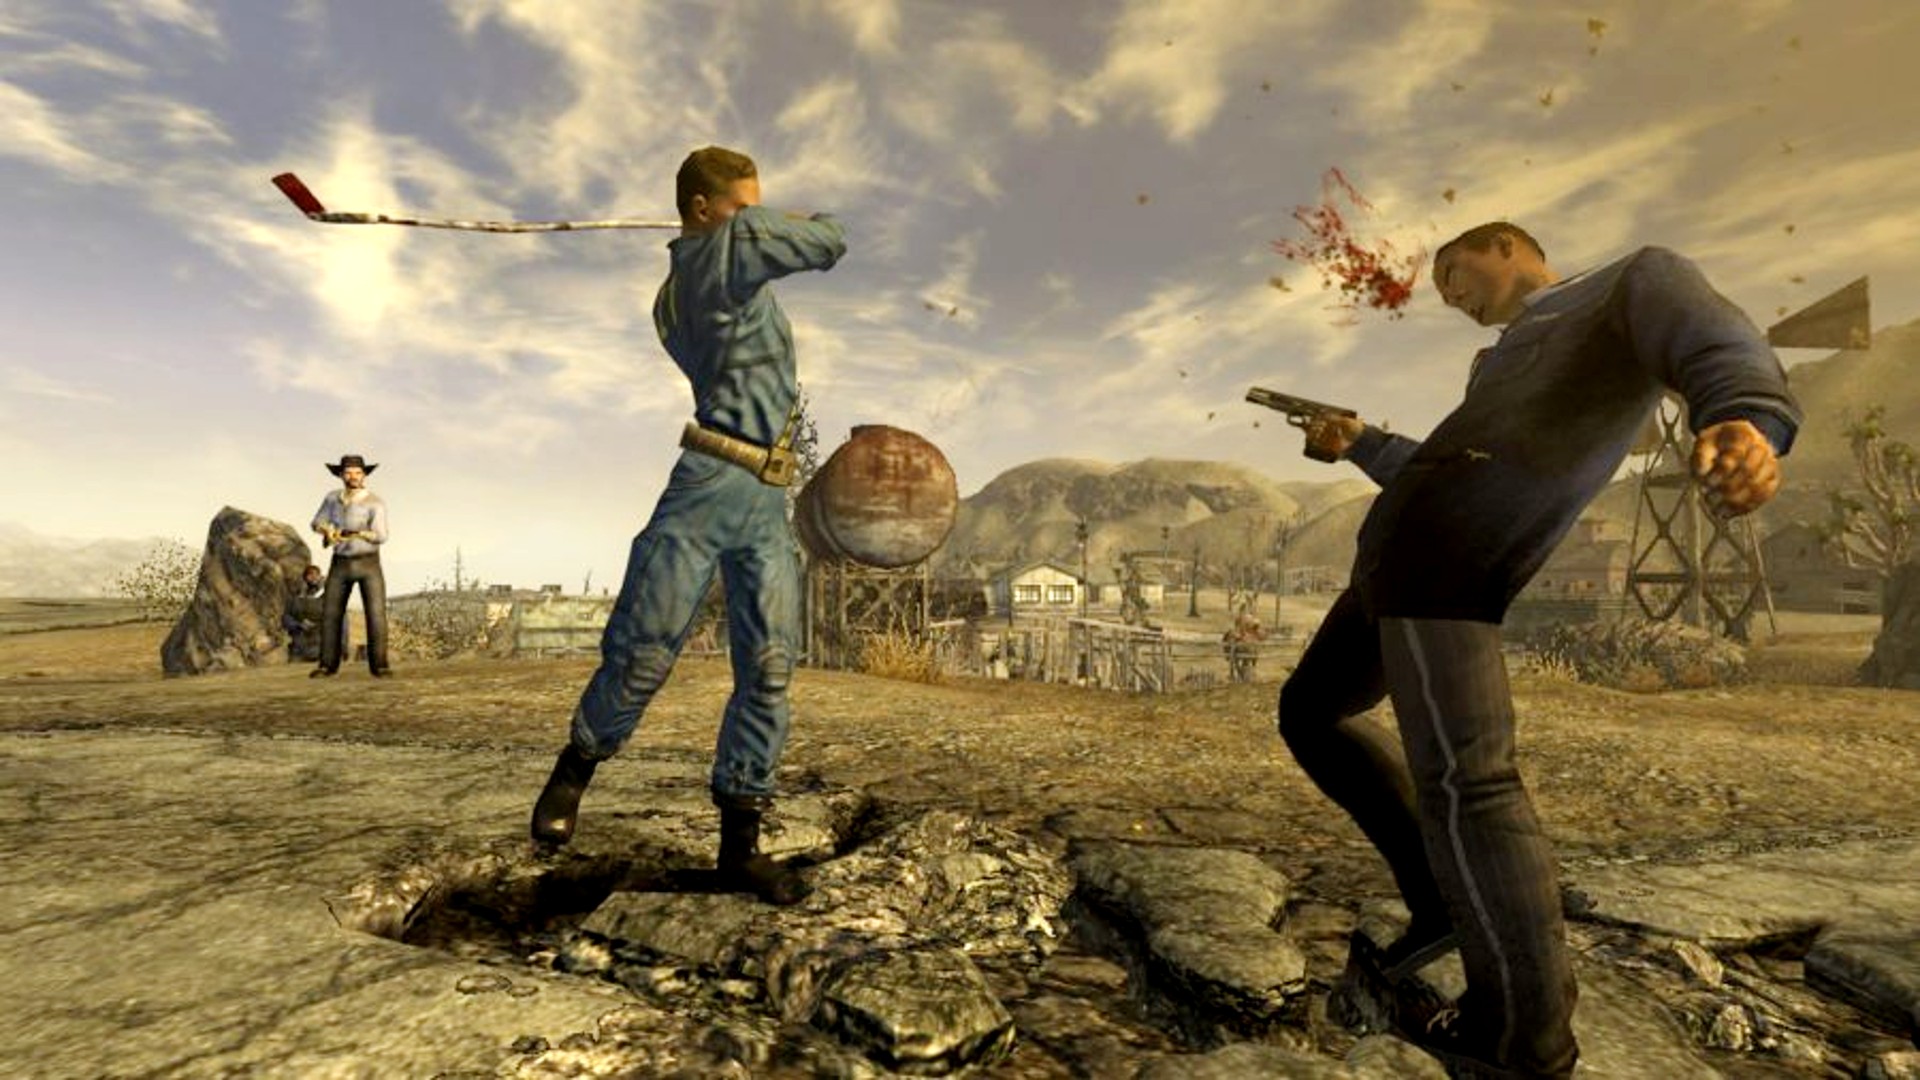 Best RPG games: Fallout: New Vegas. Image shows a person whacking someone with a golf club while someone watches in the background with a gun.